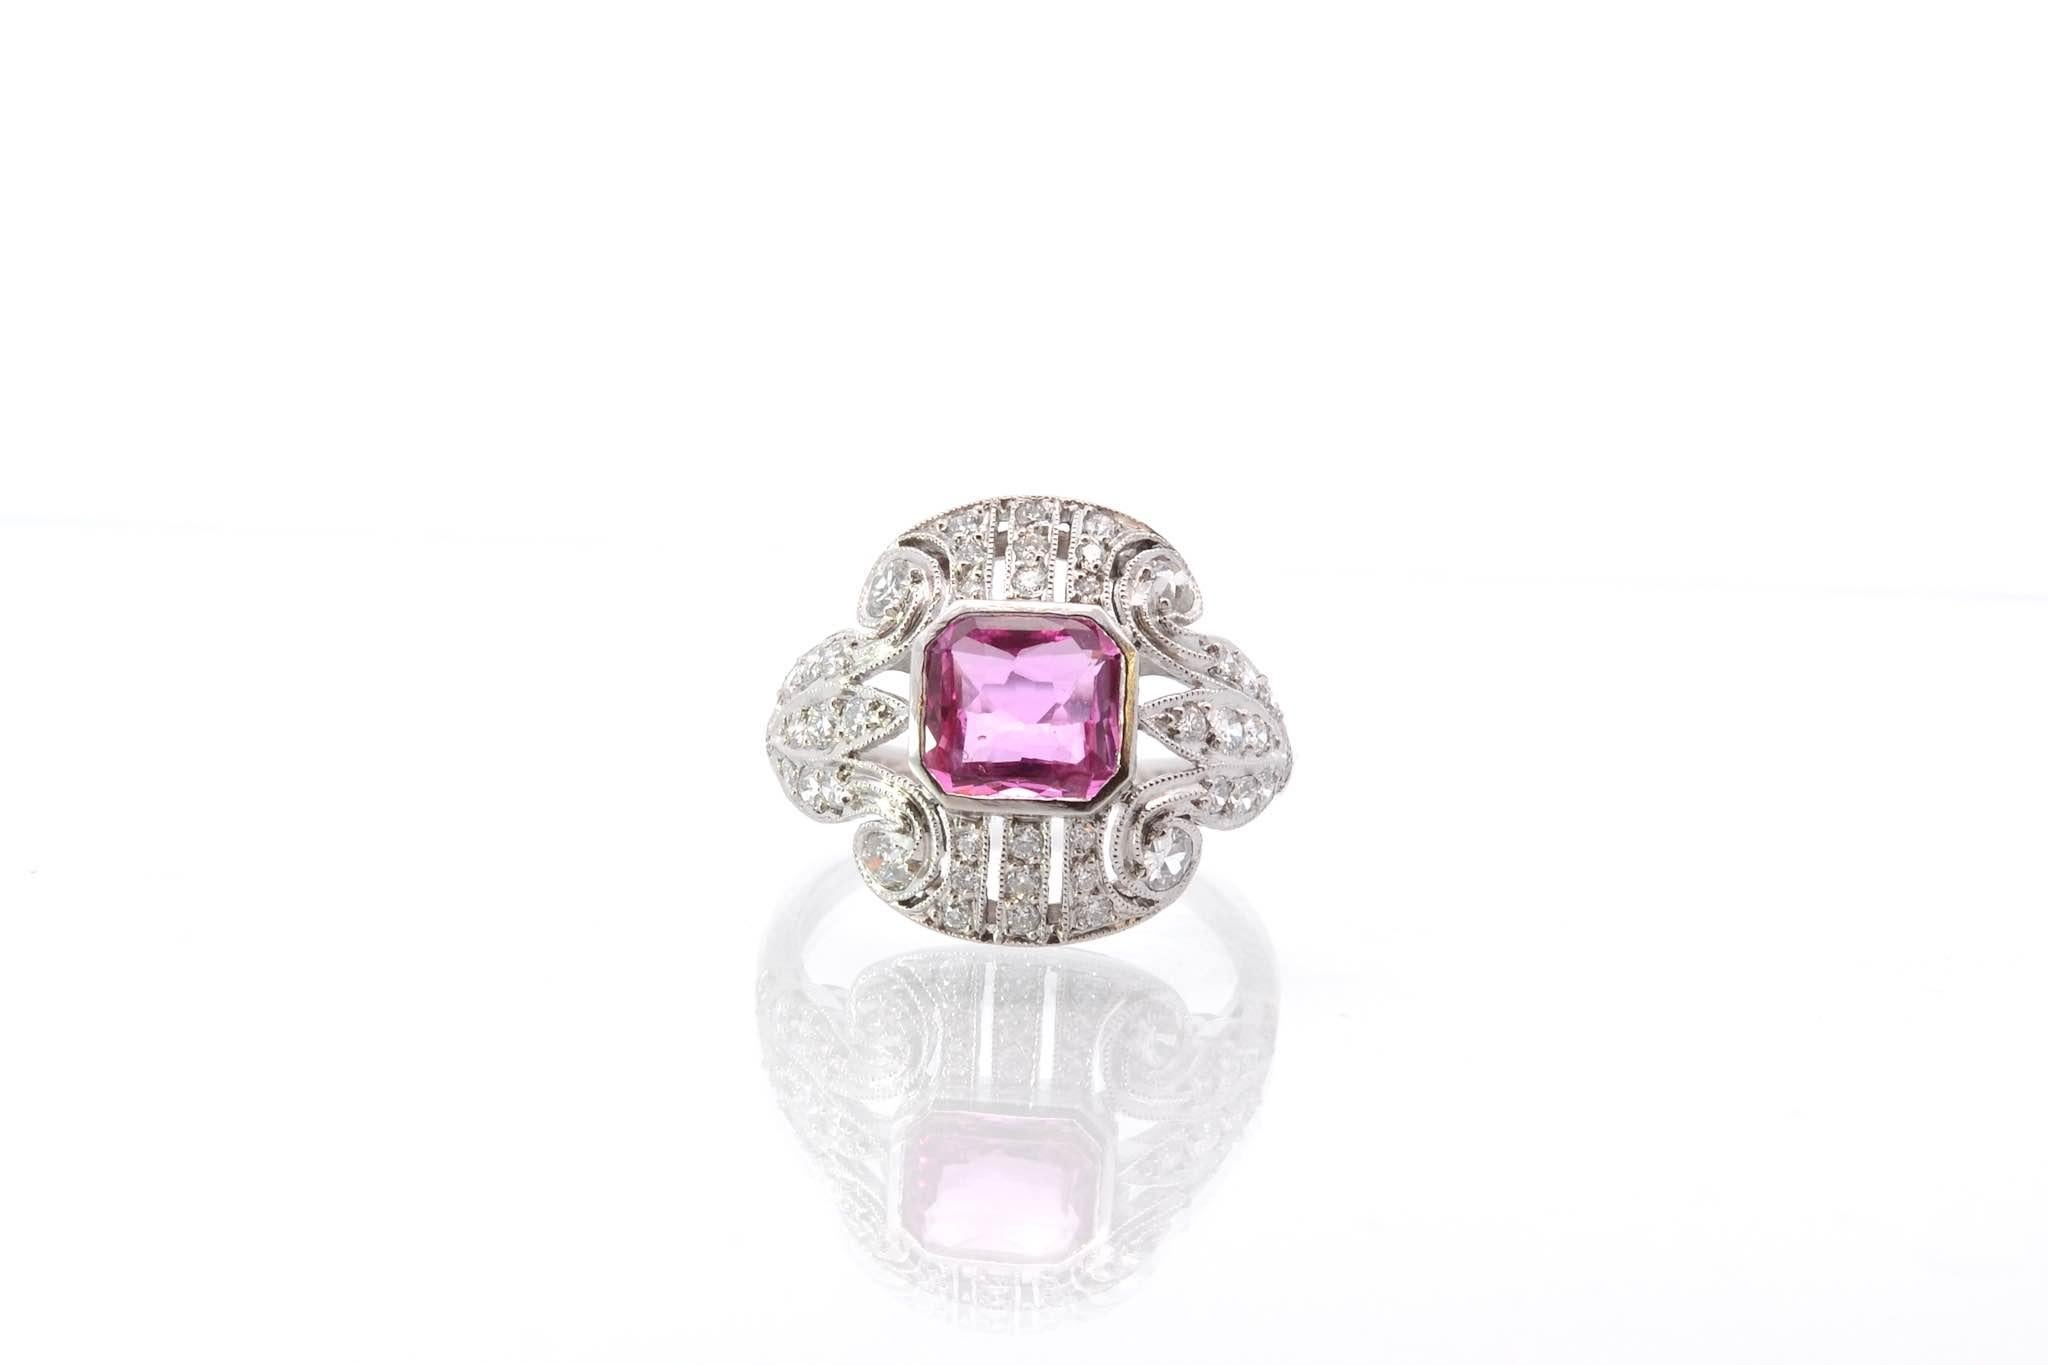 Stones: Pink sapphire of 1.66 cts and 44 diamonds of 0.80 ct
Material: Platinum
Dimensions: 1.6cm
Weight: 6.1g
Period: Recent vintage art deco style
Size: 52 (free sizing)
Certificate
Ref. : 25552 25293